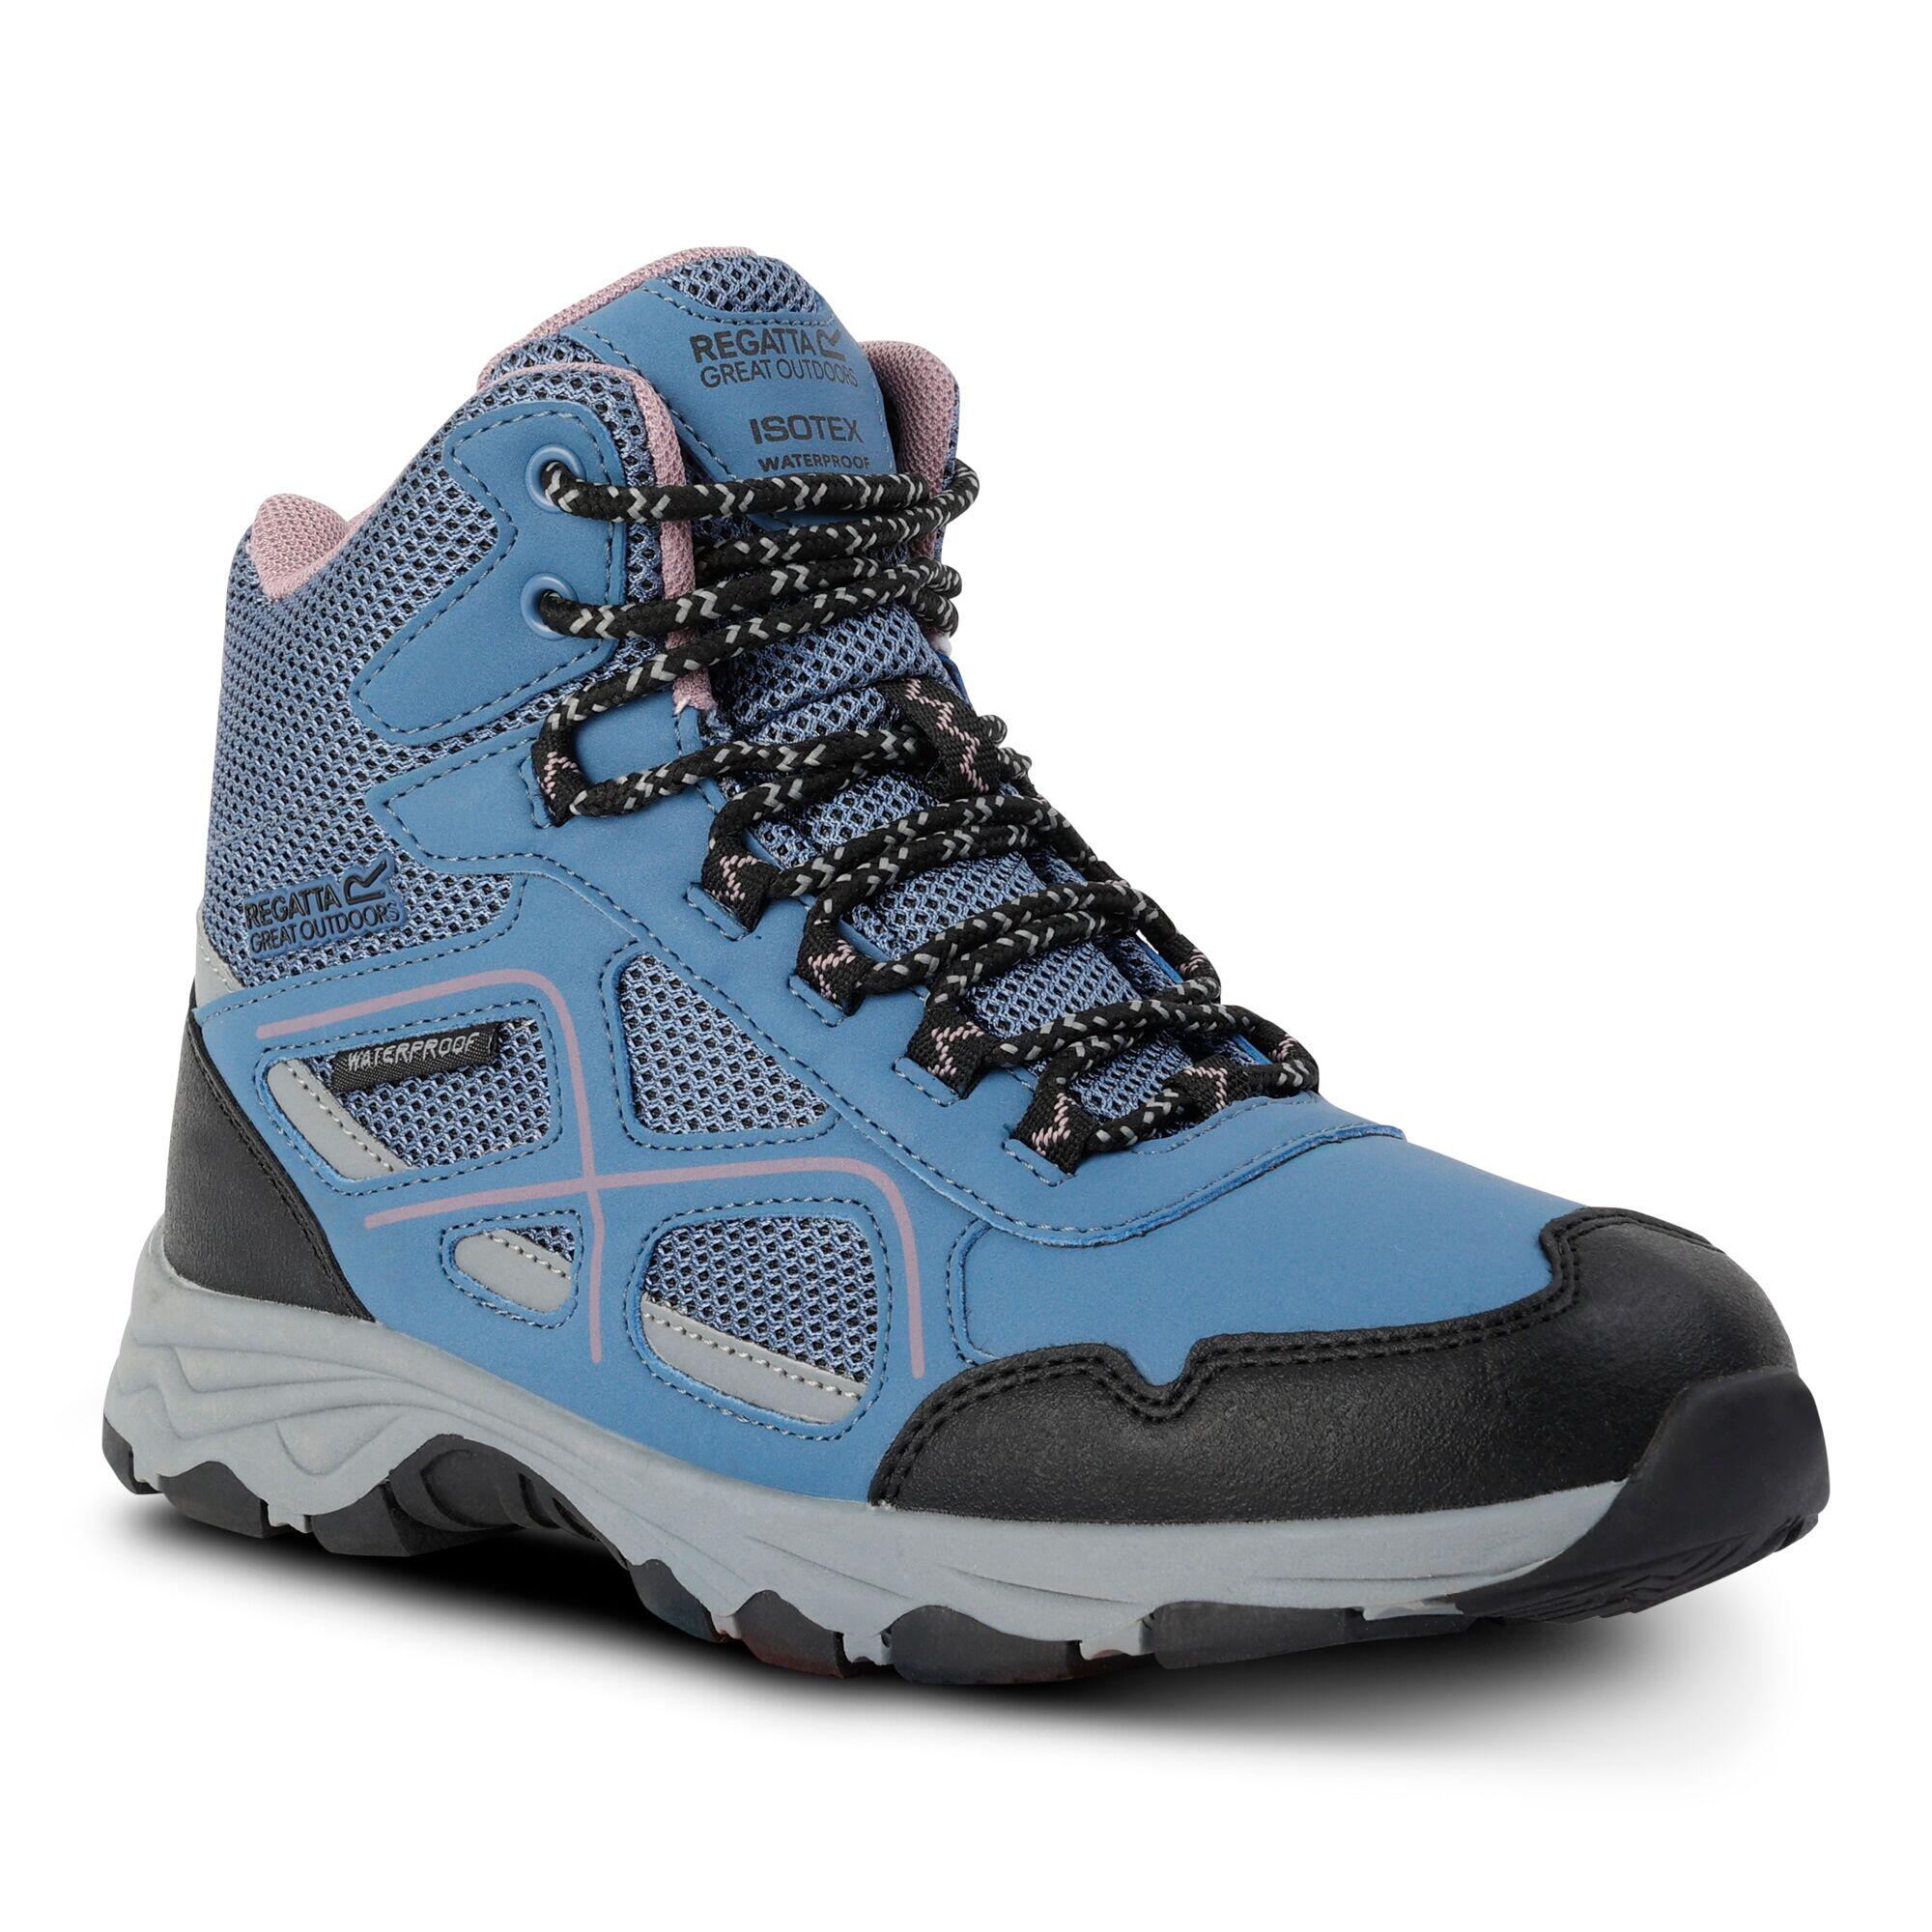 Lady Vendeavour Women's Mid Hiking Boots 4/5